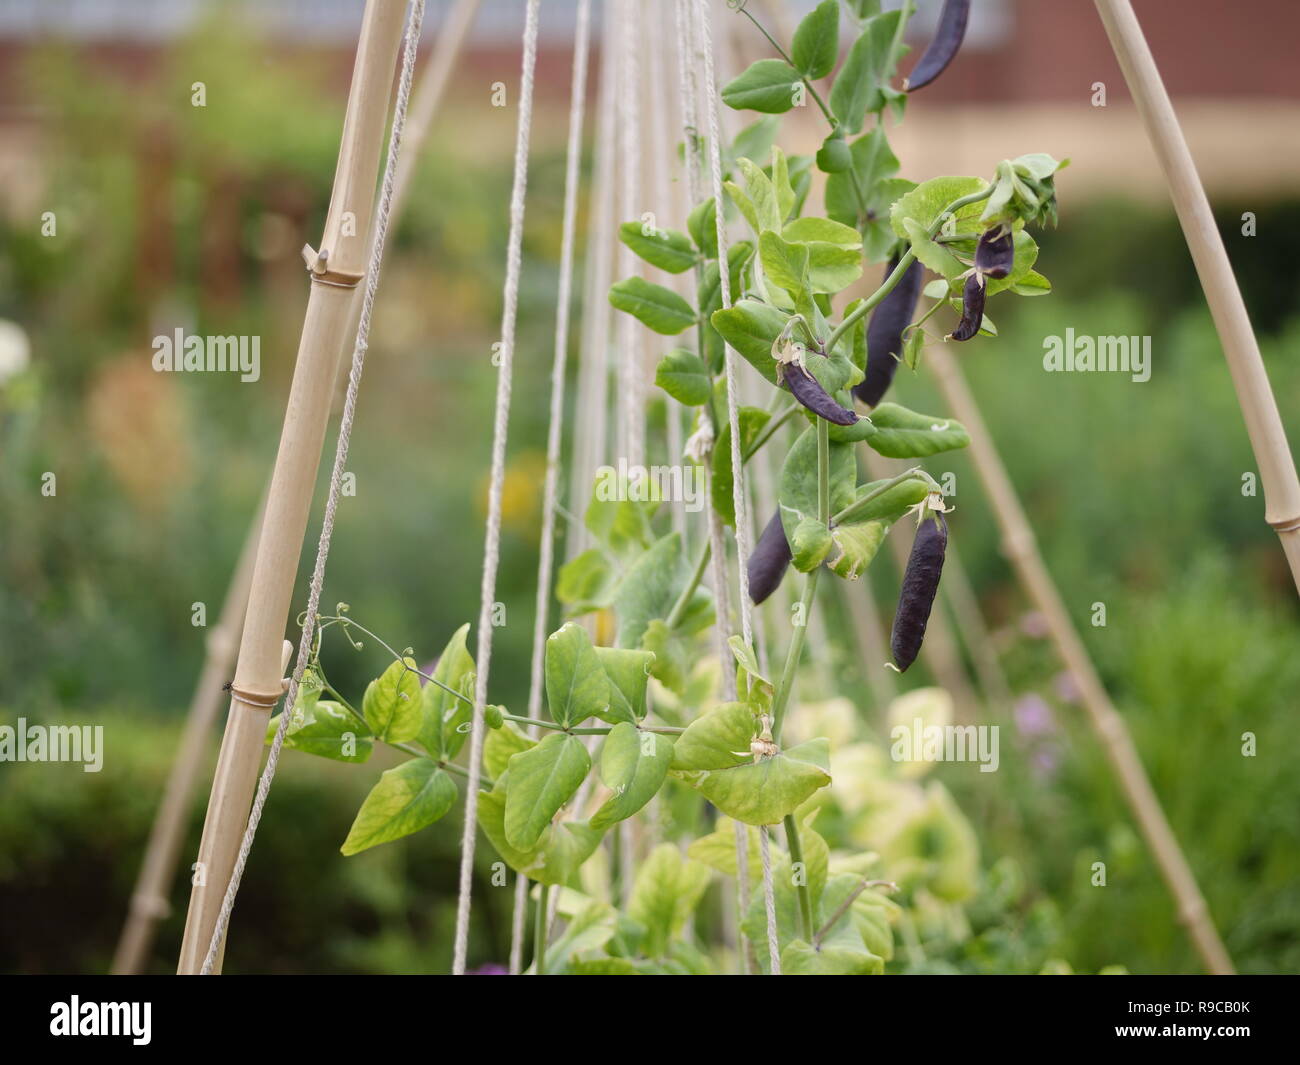 permaculture garden with beans and flowers Stock Photo